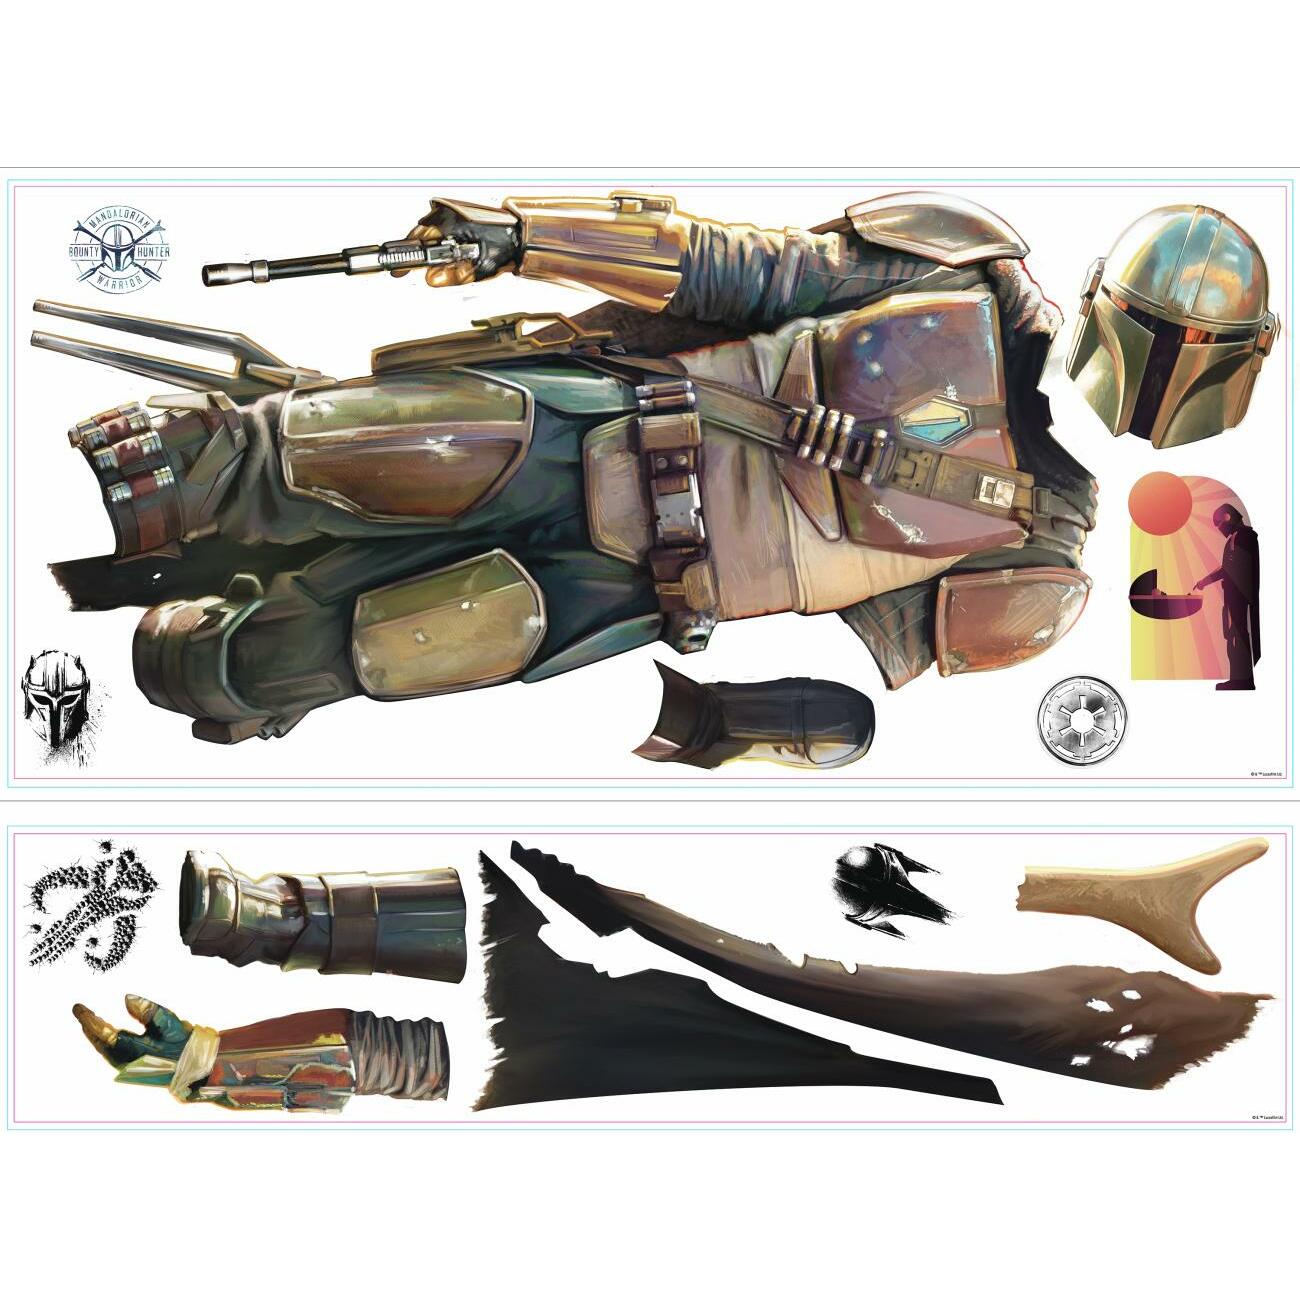 The Mandalorian Peel and Stick Giant Wall Decals Wall Decals RoomMates   